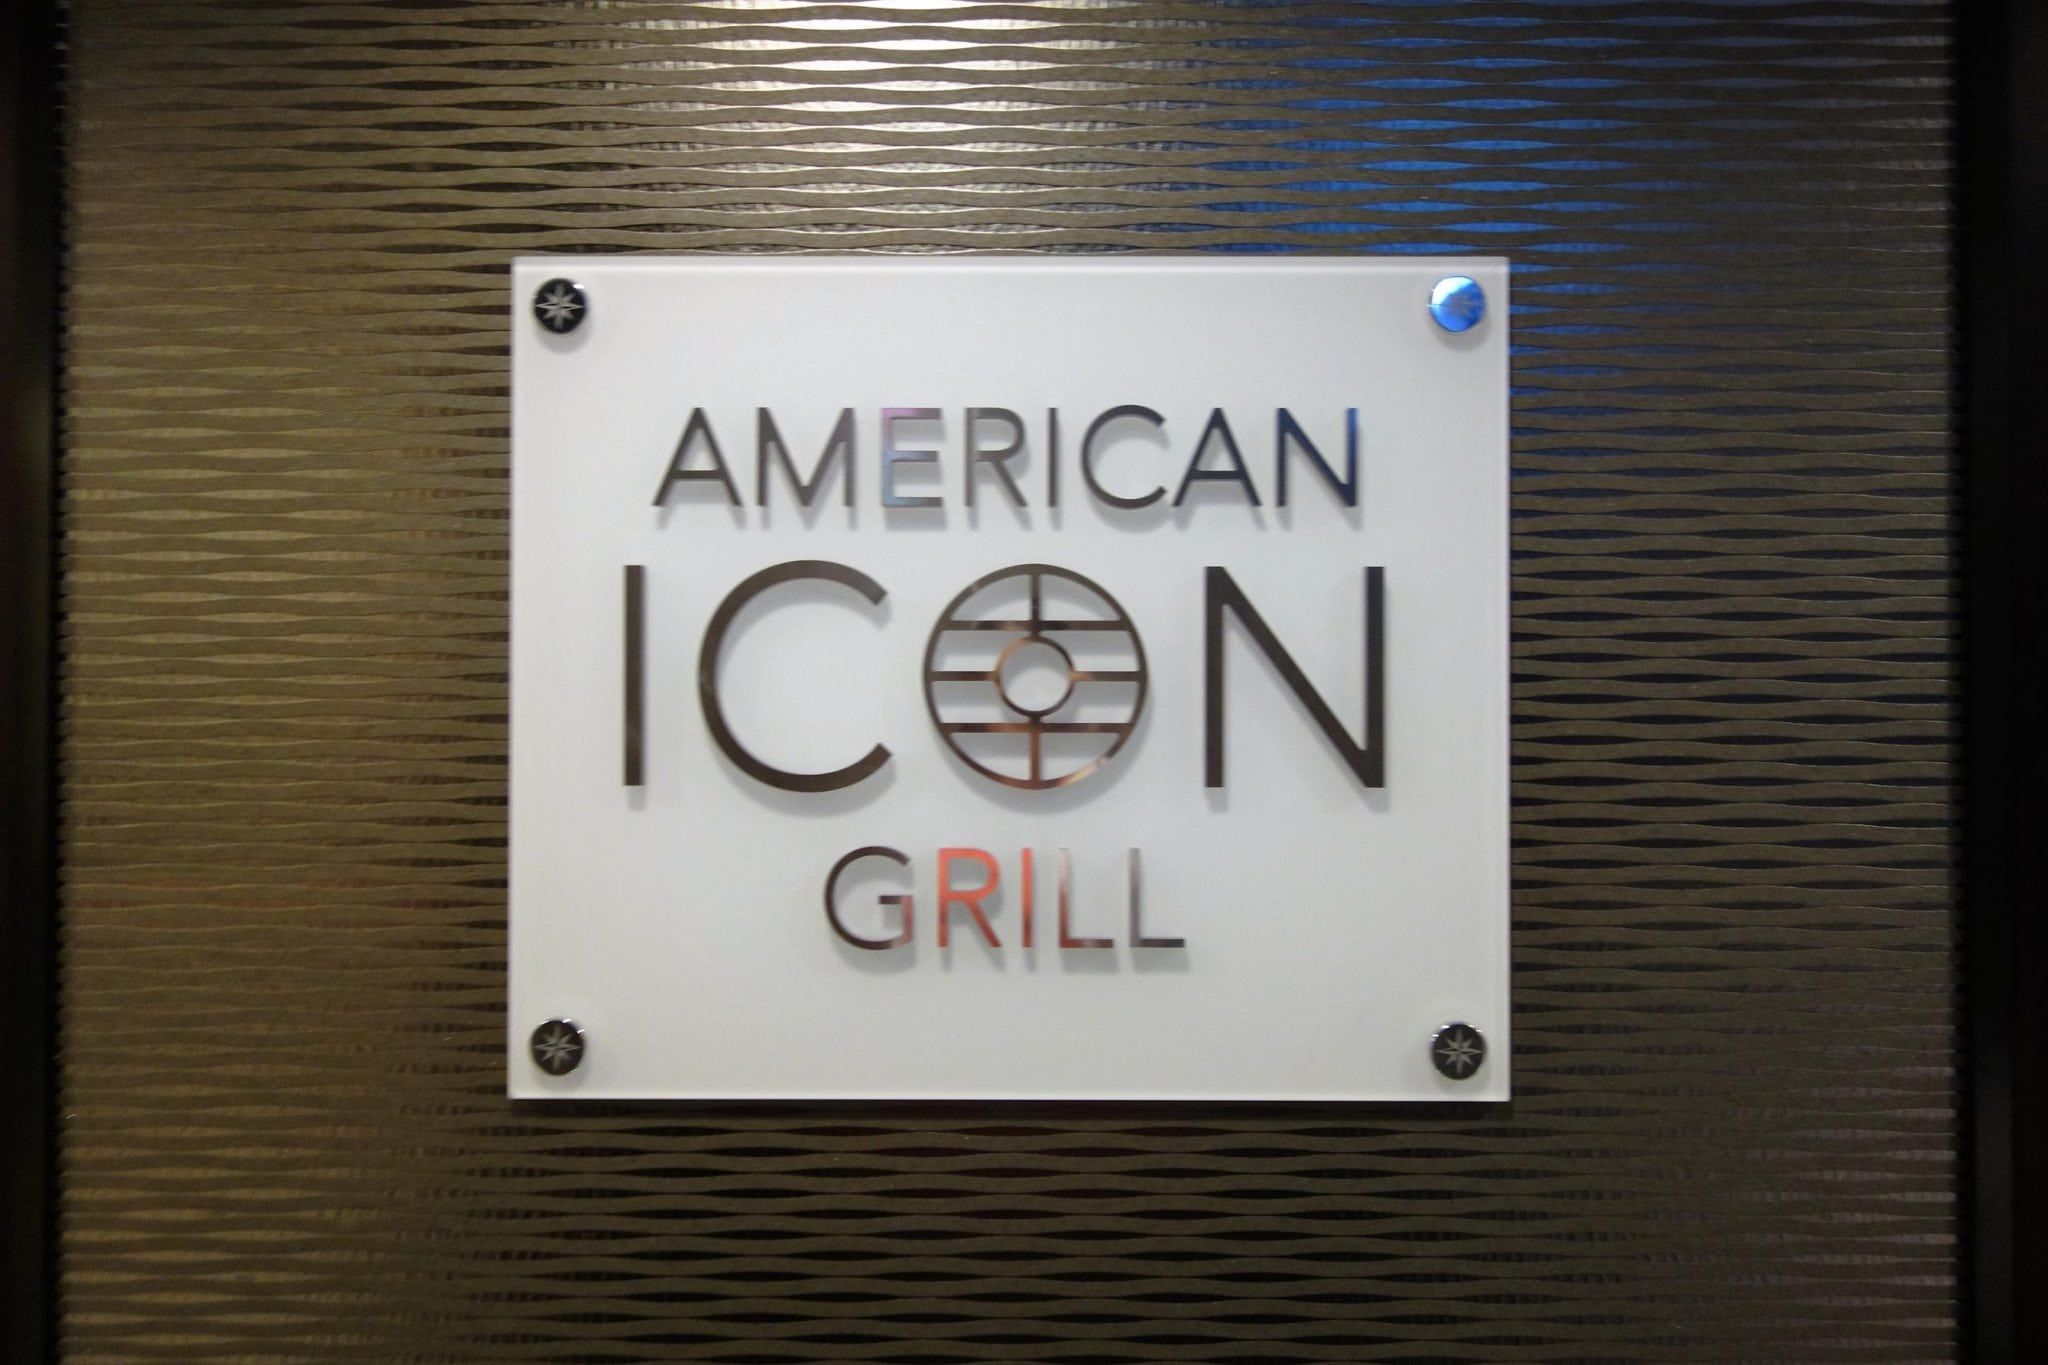 American Icon Grill Anthem of the Seas